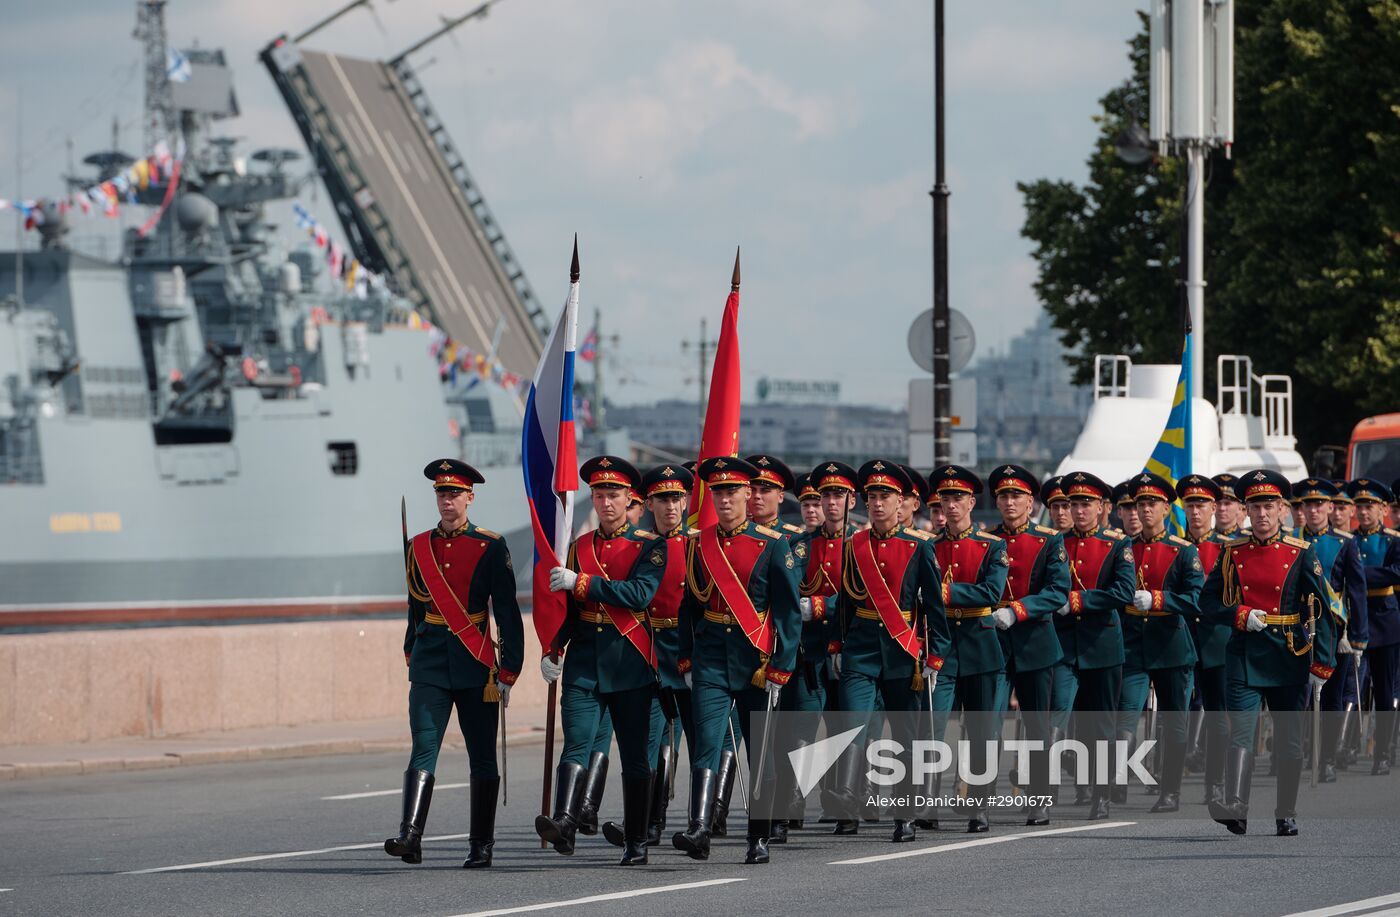 Navy Day celebrated in St. Petersburg